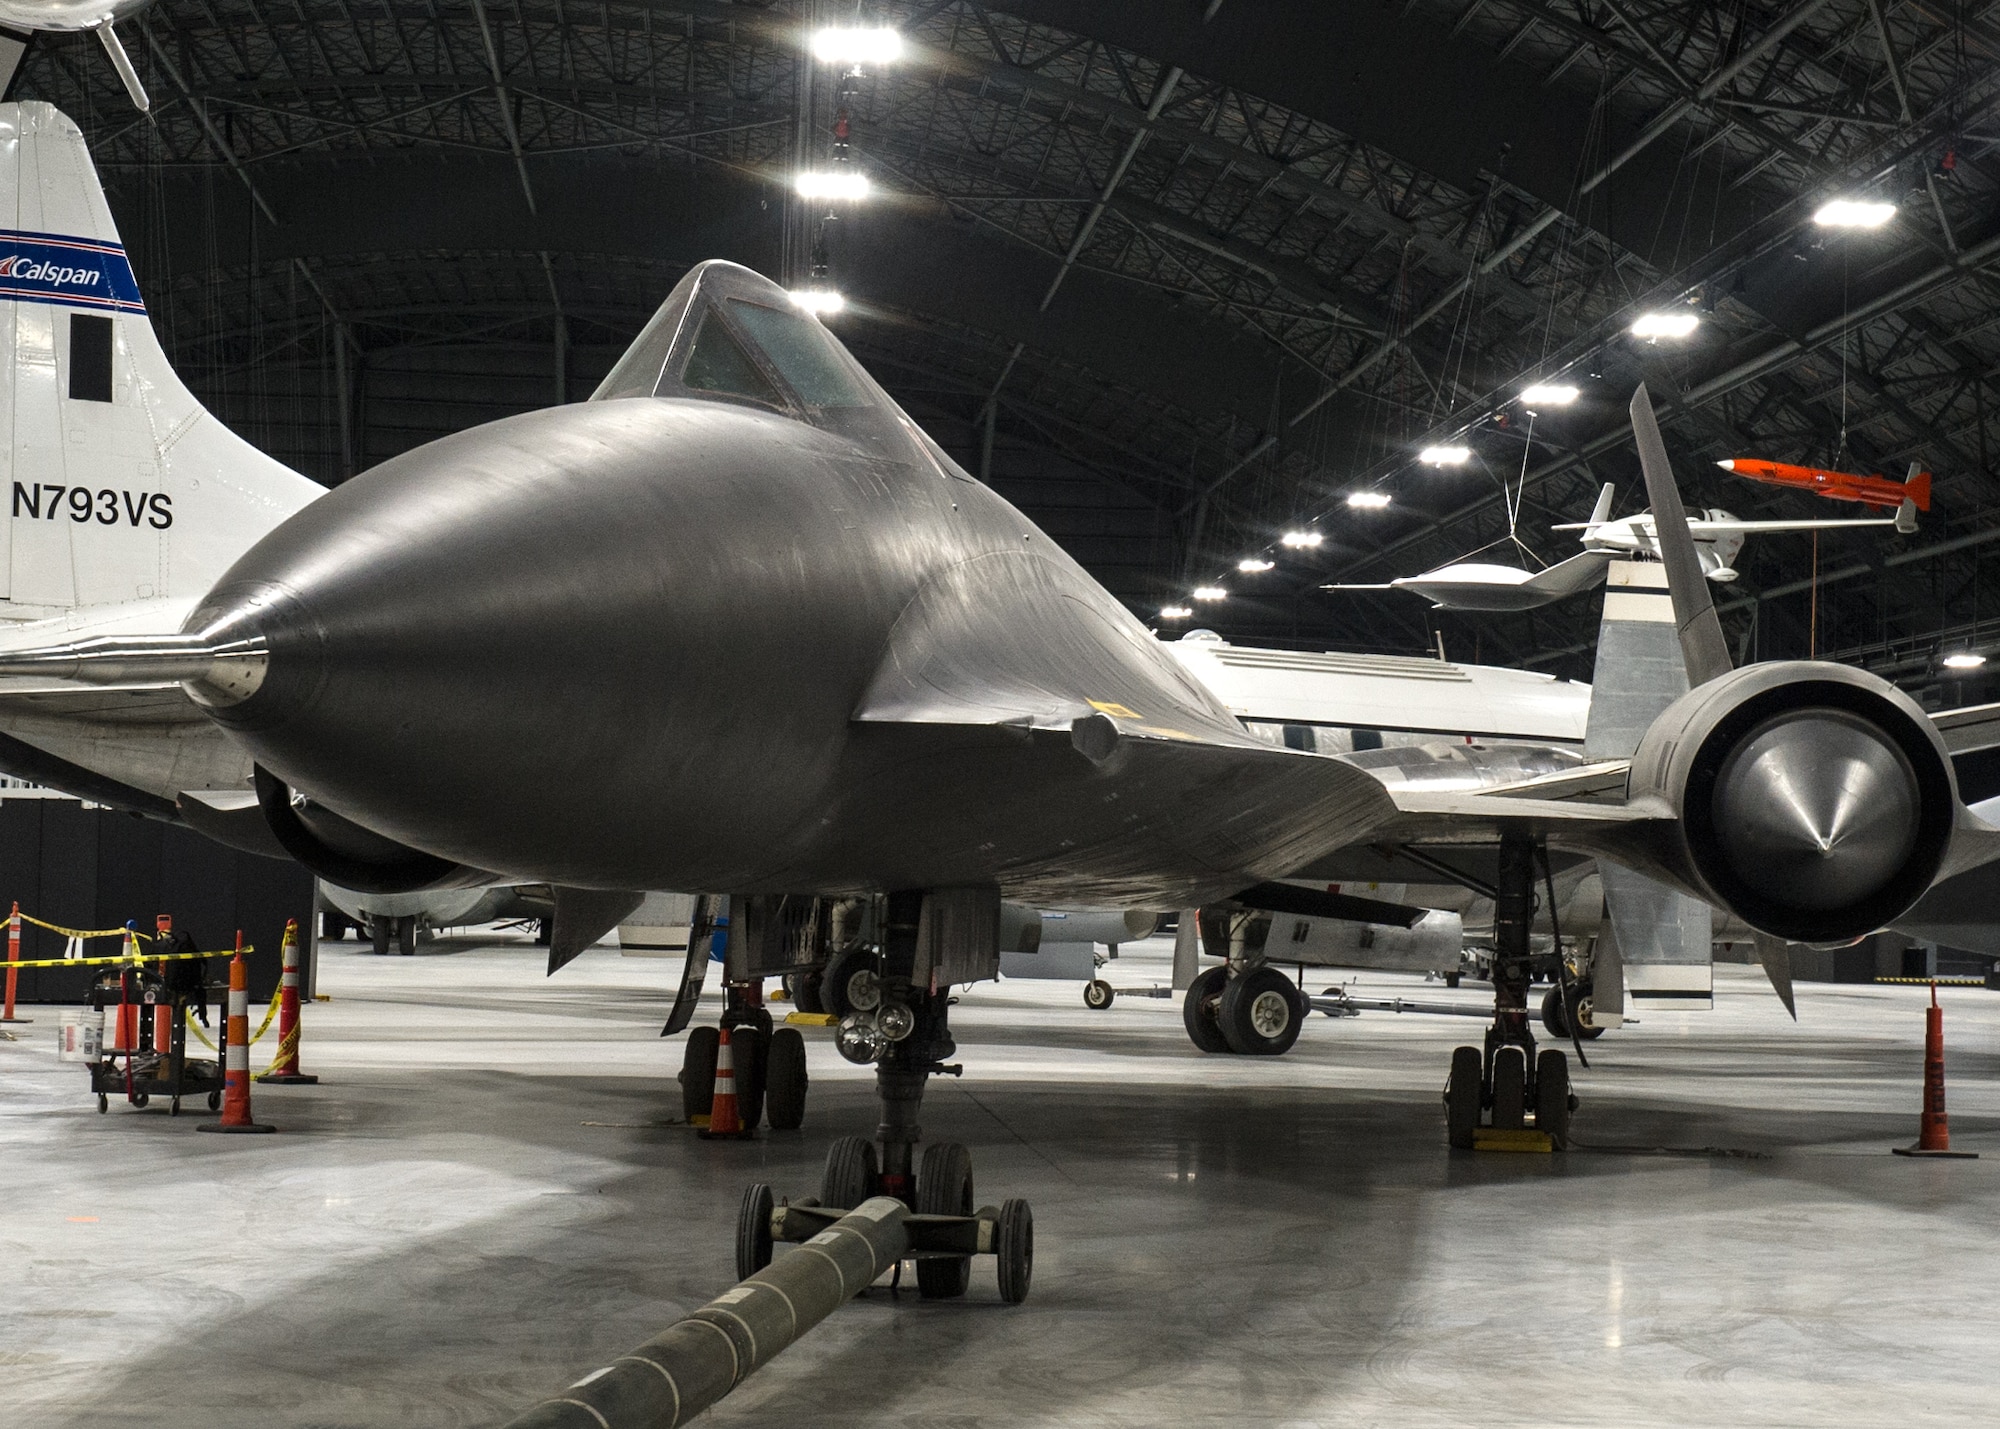 Lockheed YF-12A in the Research & Development Gallery at the National Museum of the U.S. Air Force on December 28, 2015. (U.S. Air Force photo)